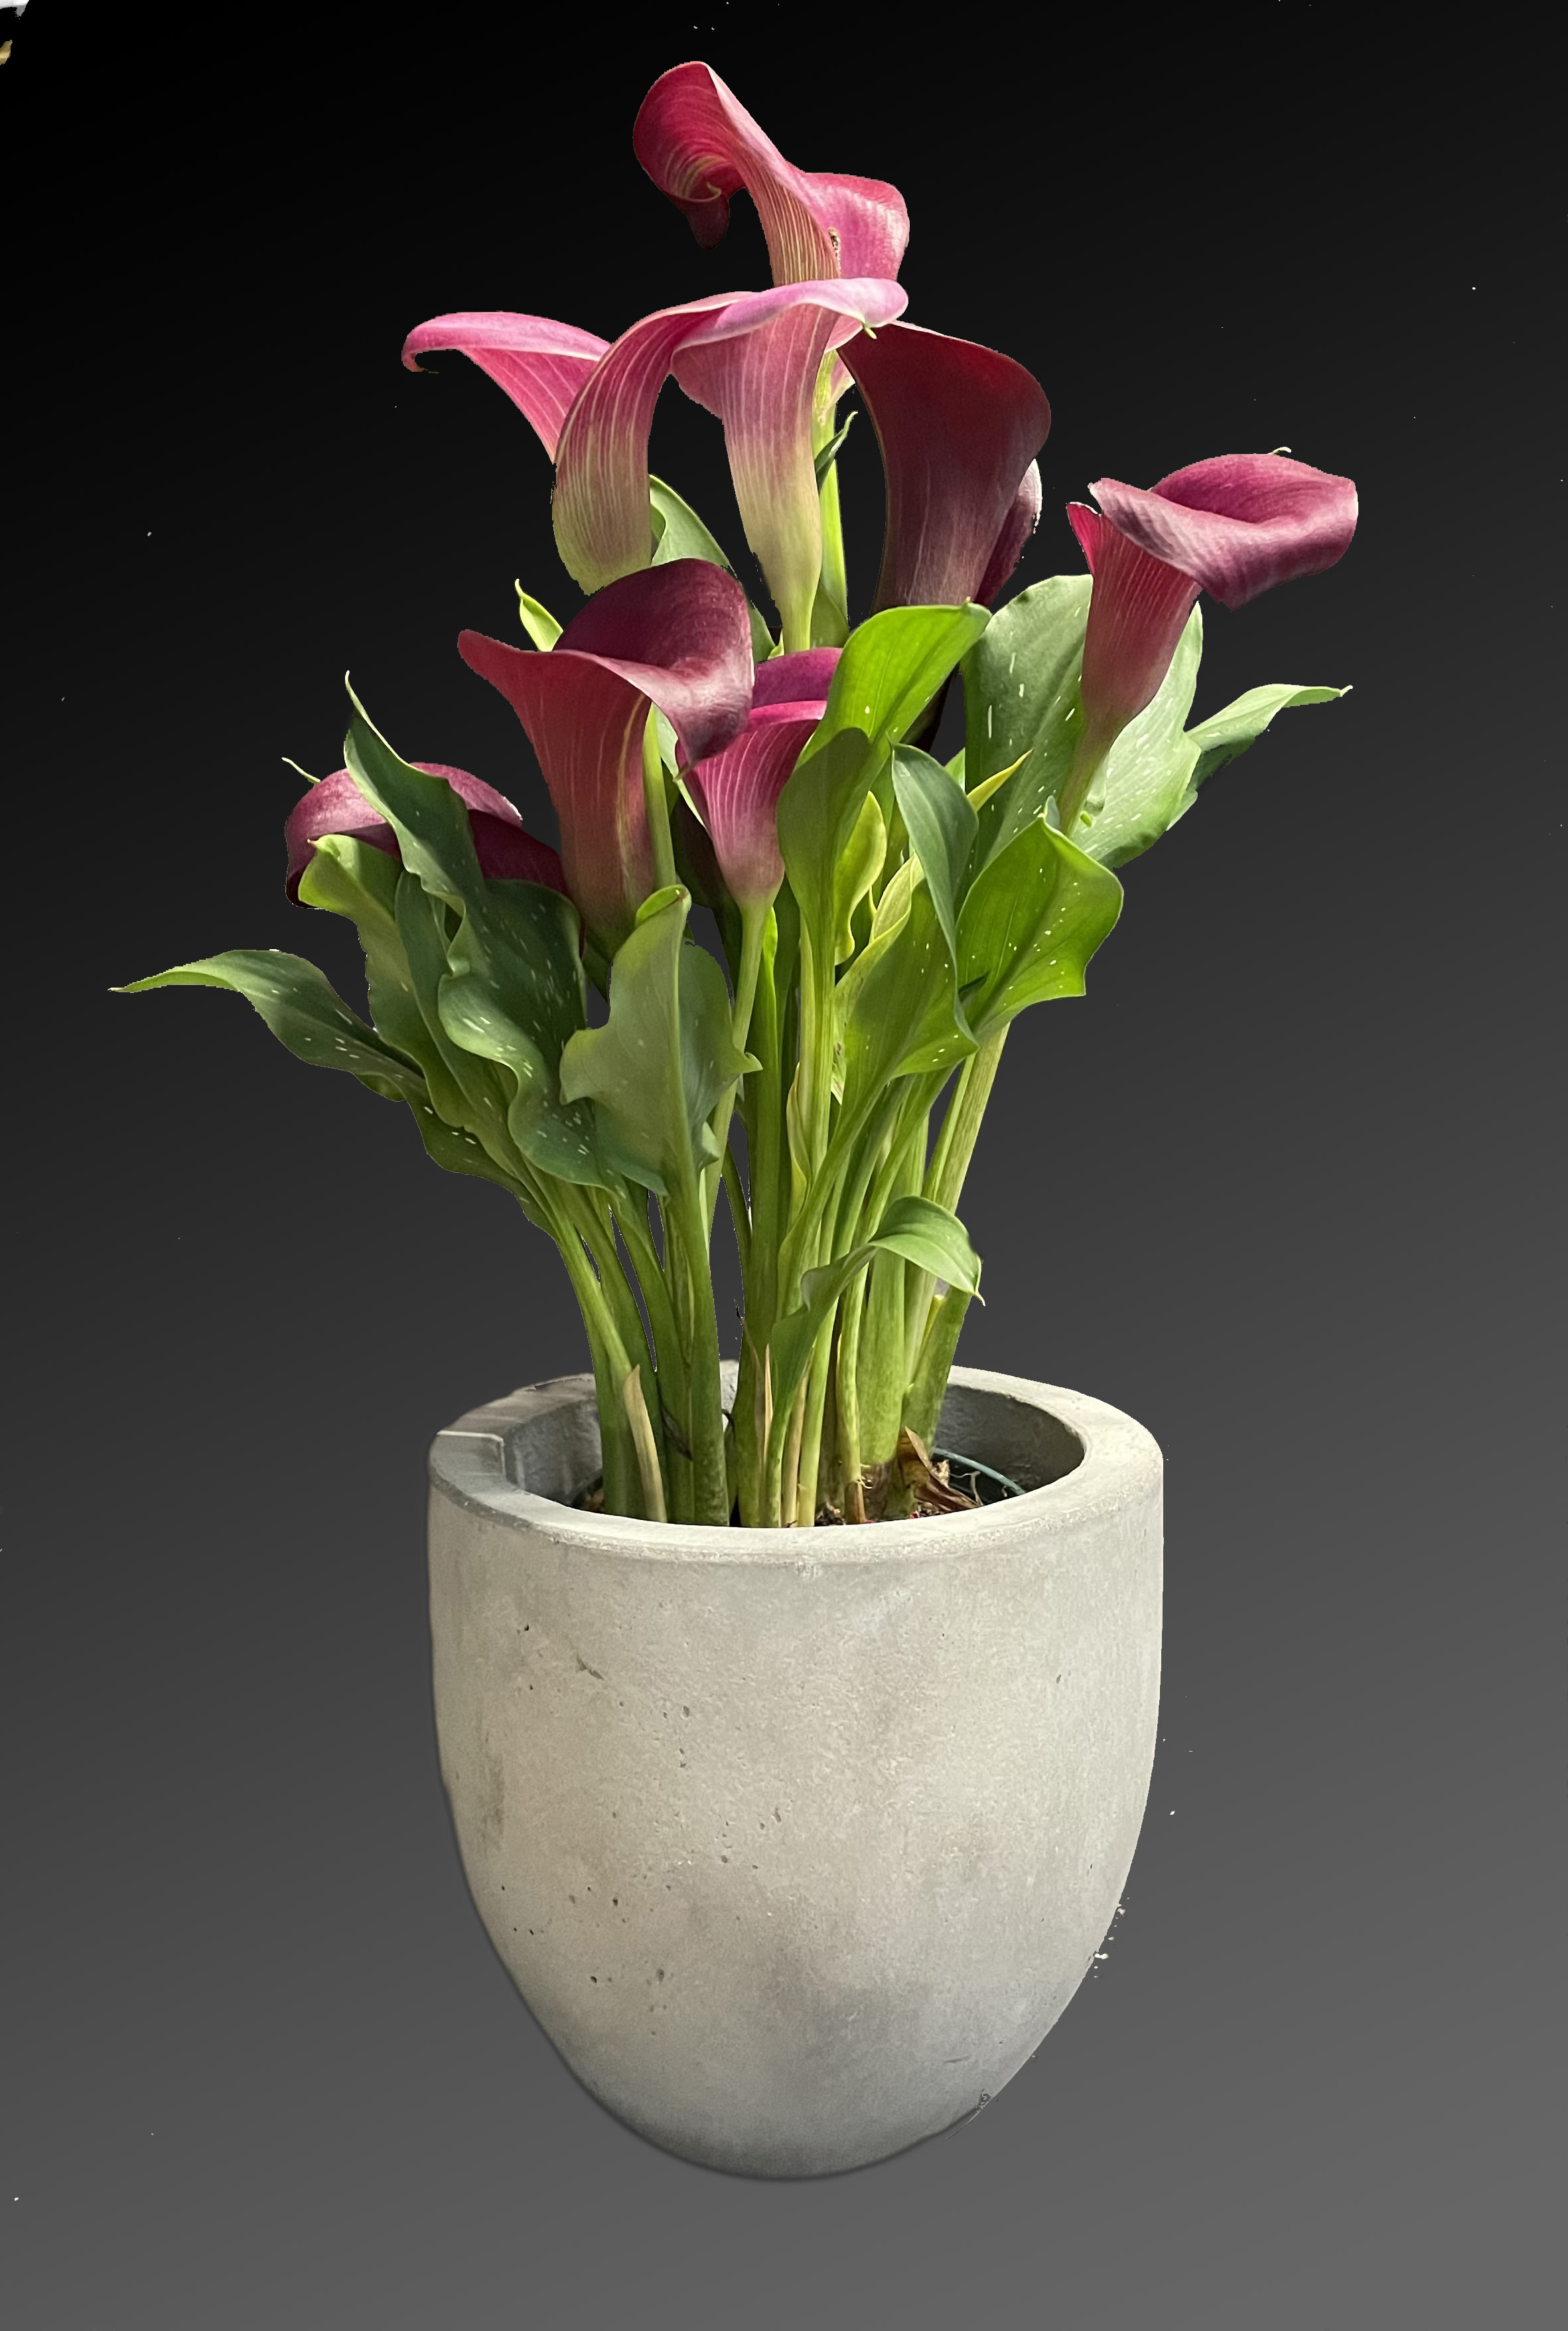 Spring Calla Lily Plant - Presented in a hand-glazed, hand-speckled, downright ceramic pot, this elegant pink calla lily plant is a springtime gift that lasts! This graceful pink calla lily plant is delivered in fancy ceramic Pot. Orientation: All-Around